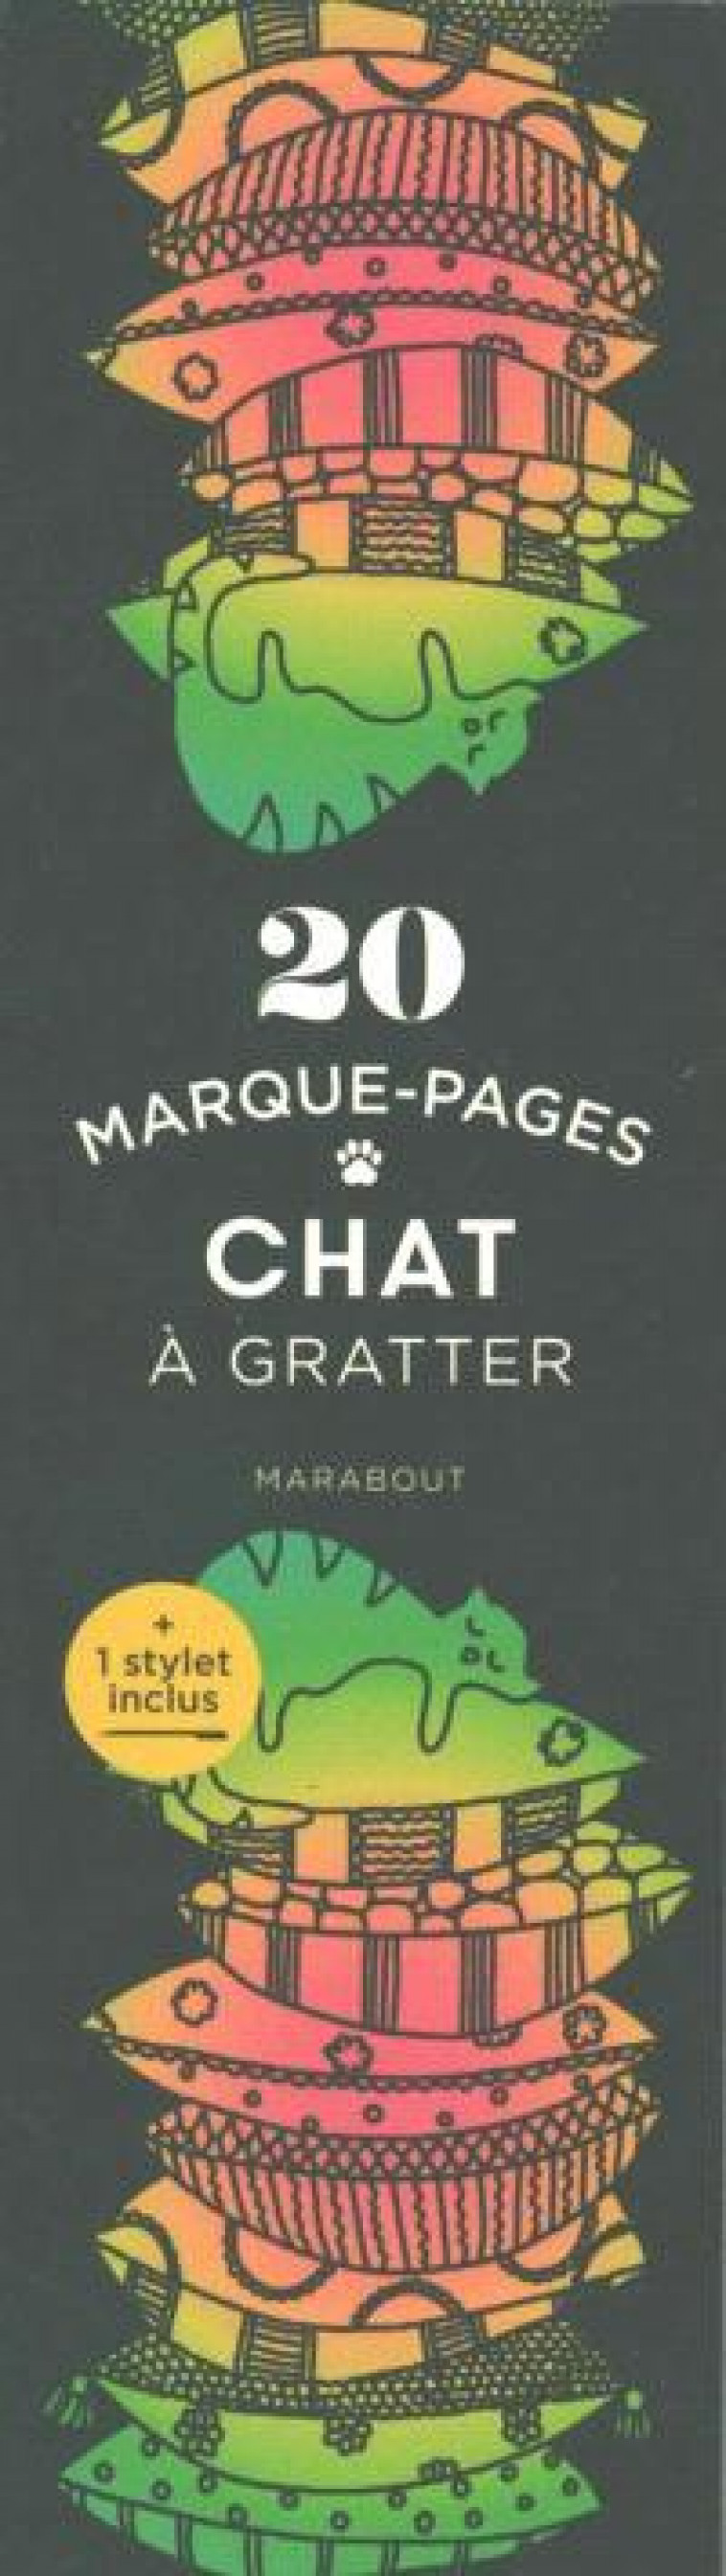 MARQUE-PAGES A GRATTER CHAT - XXX - MARABOUT